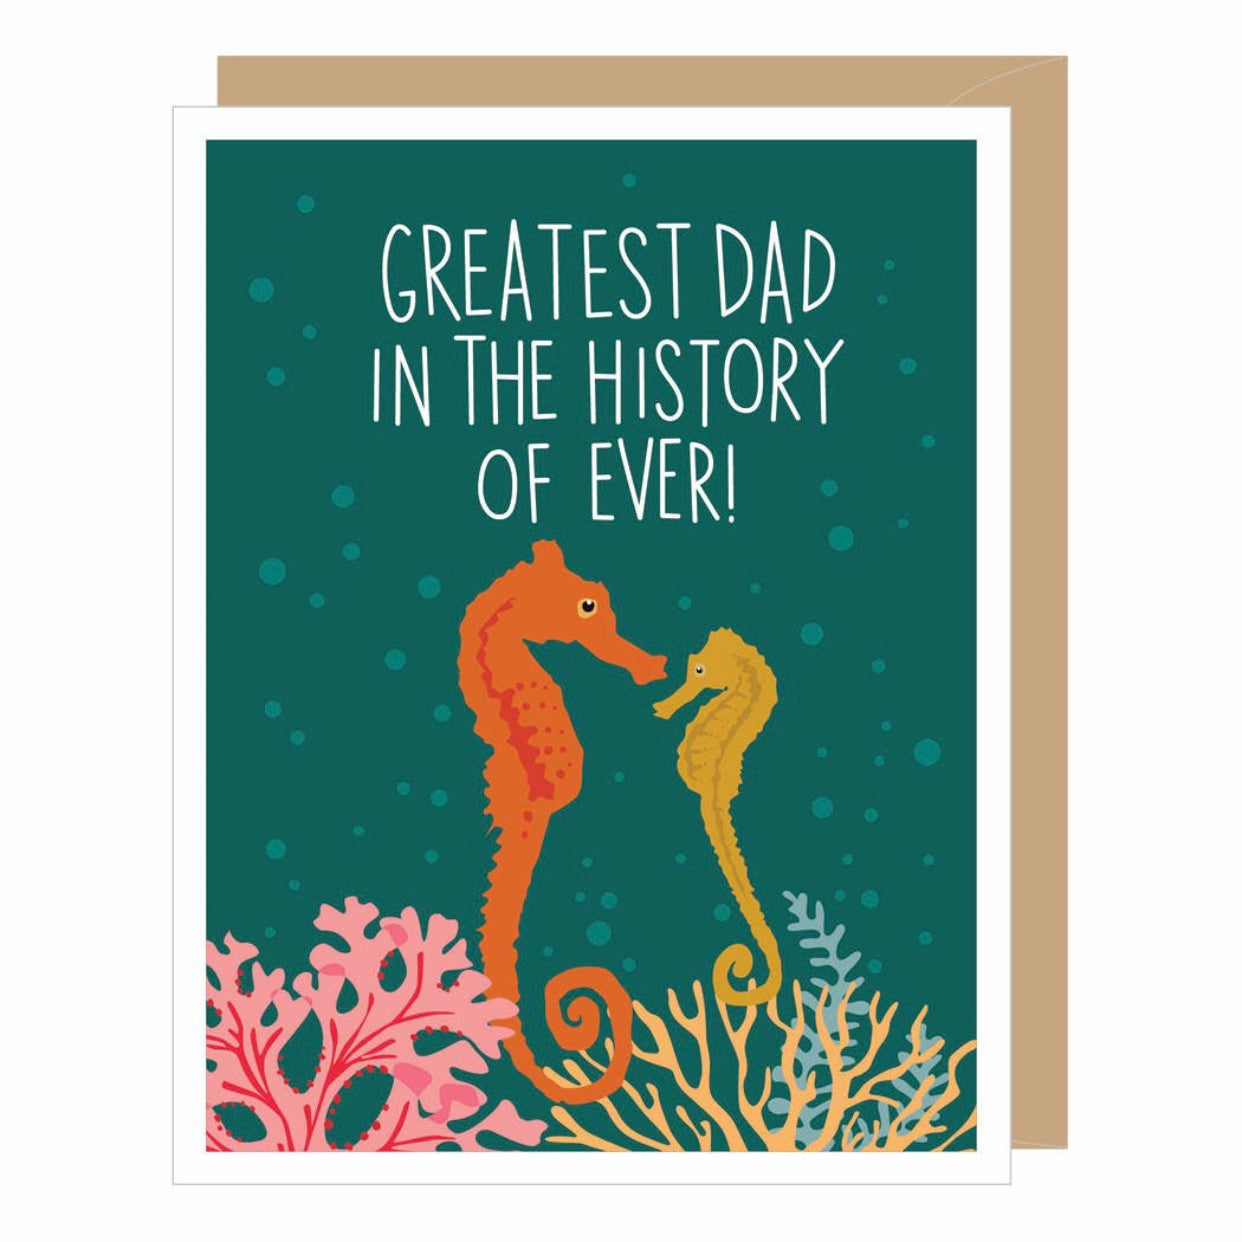 Greatest Dad fathers day cards